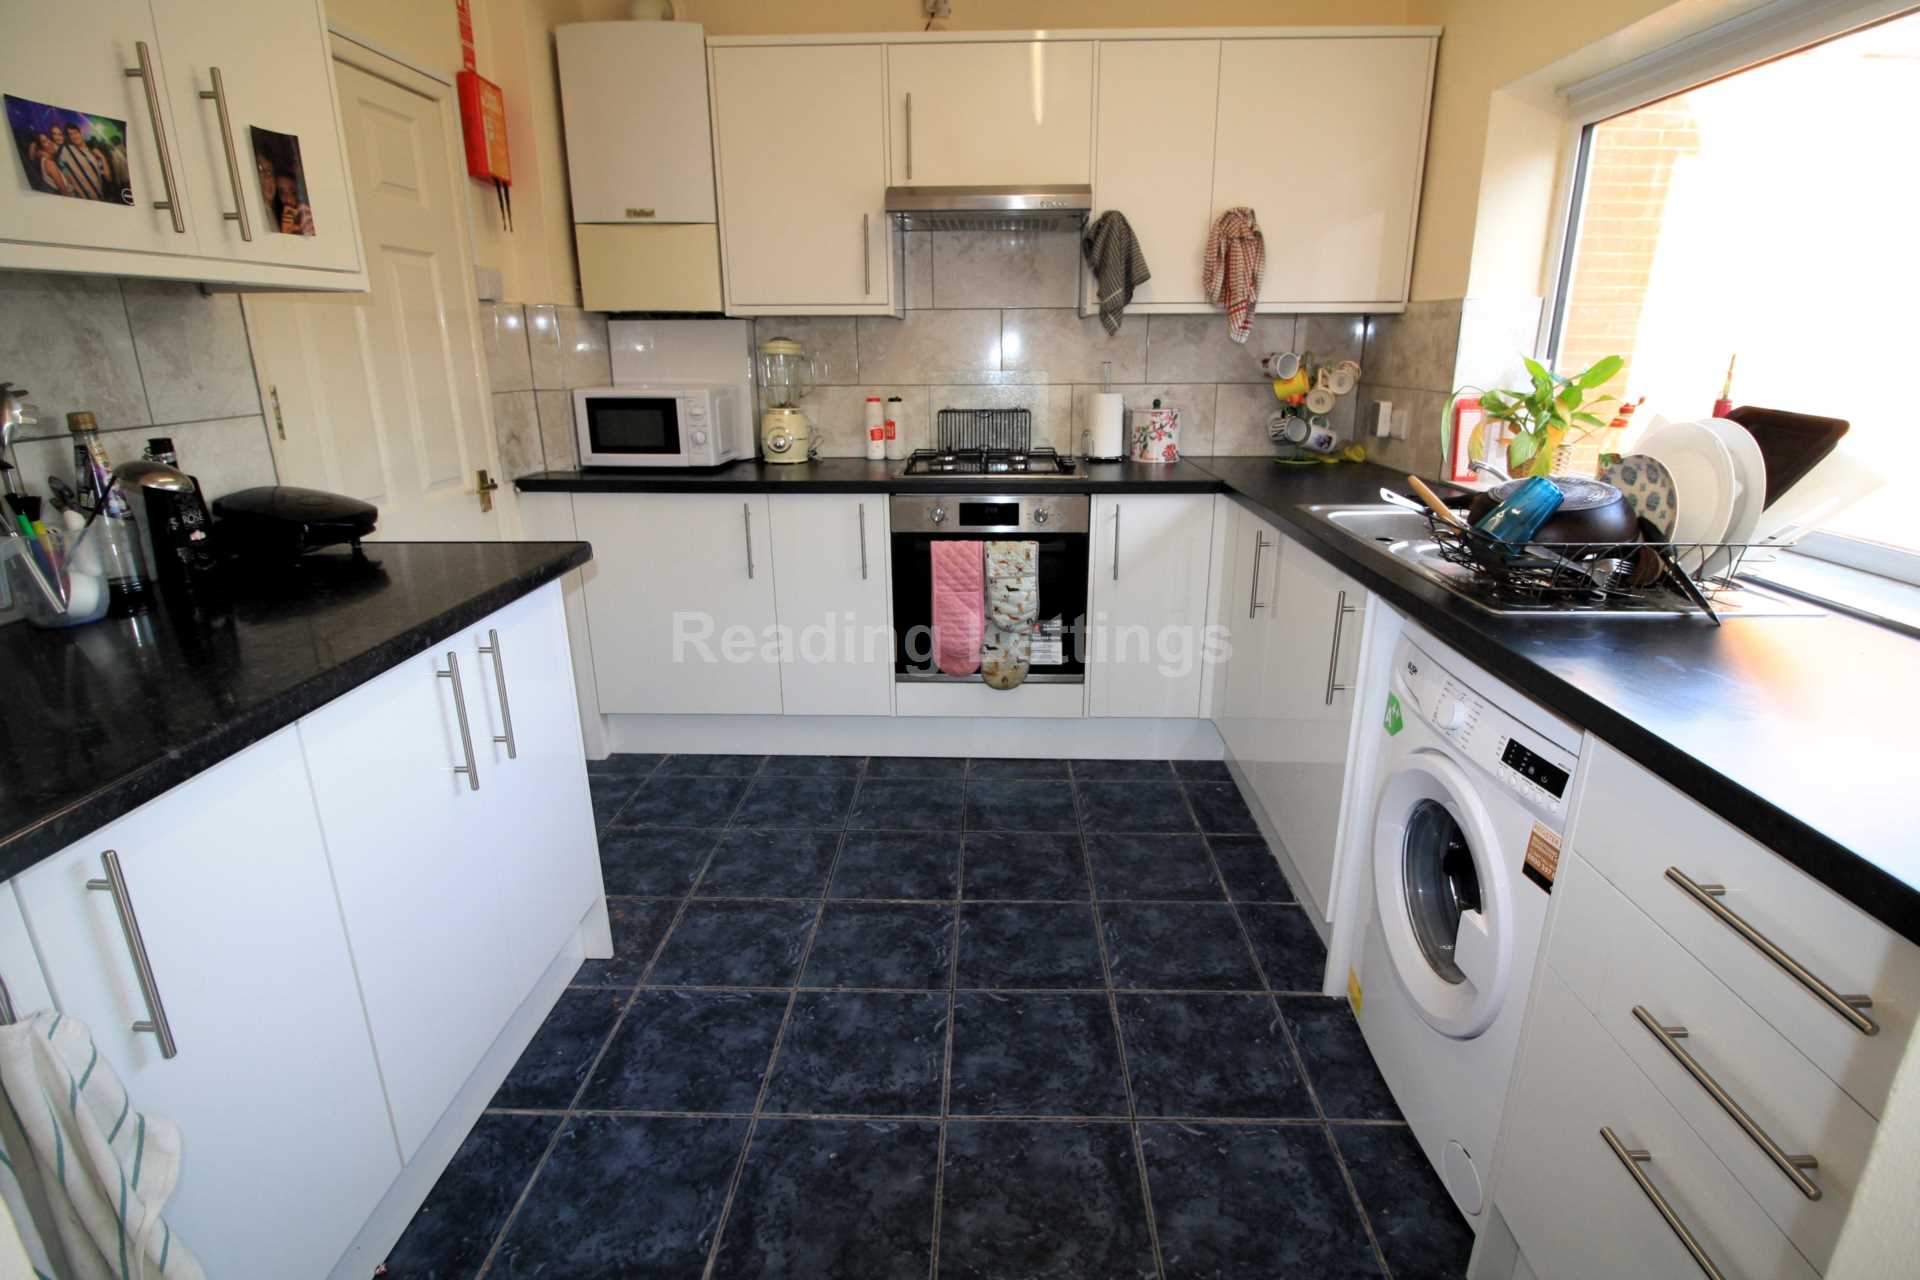 Blenheim Road, Reading - GAS INCLUDED, Image 5